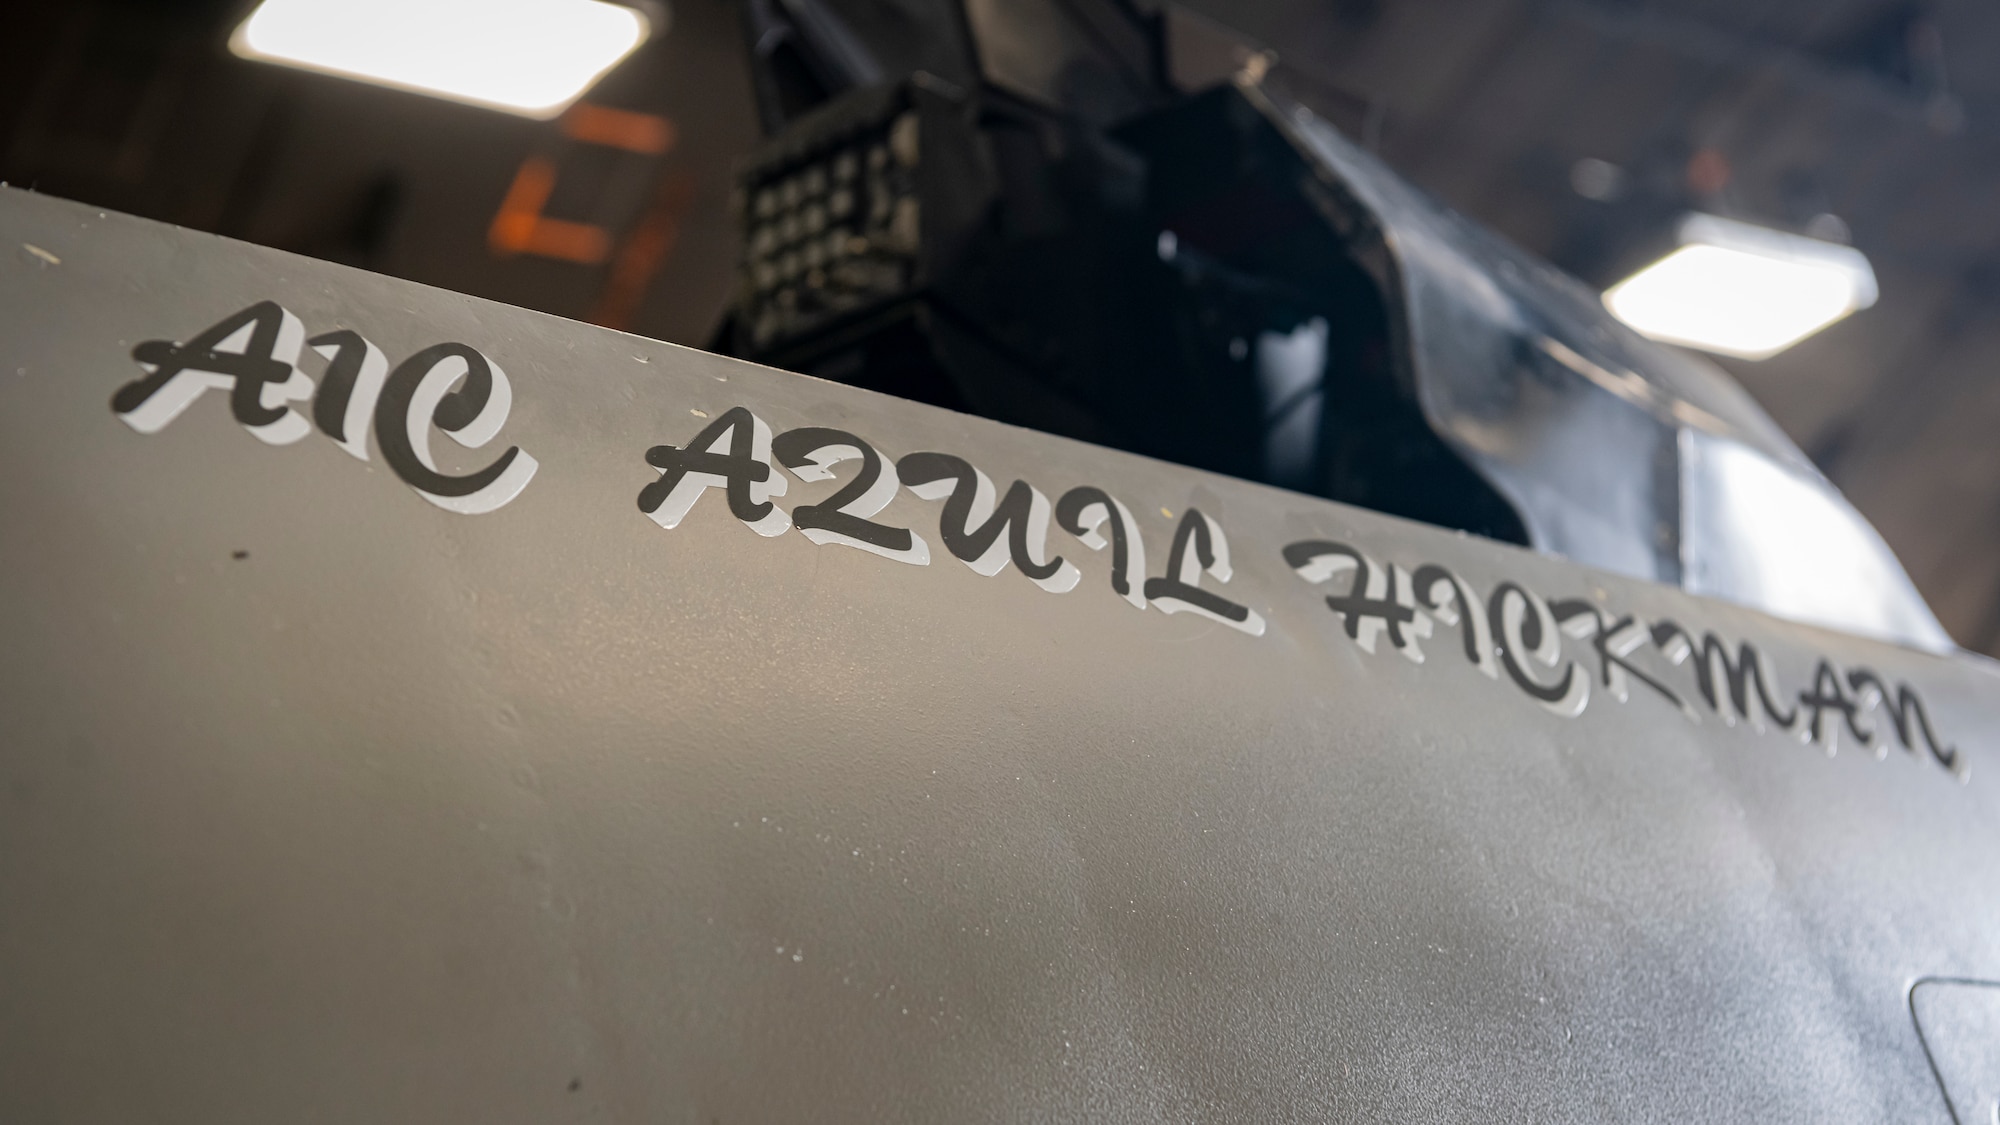 Crew chiefs name painted on the side of a F-16 Fighting Falcon.